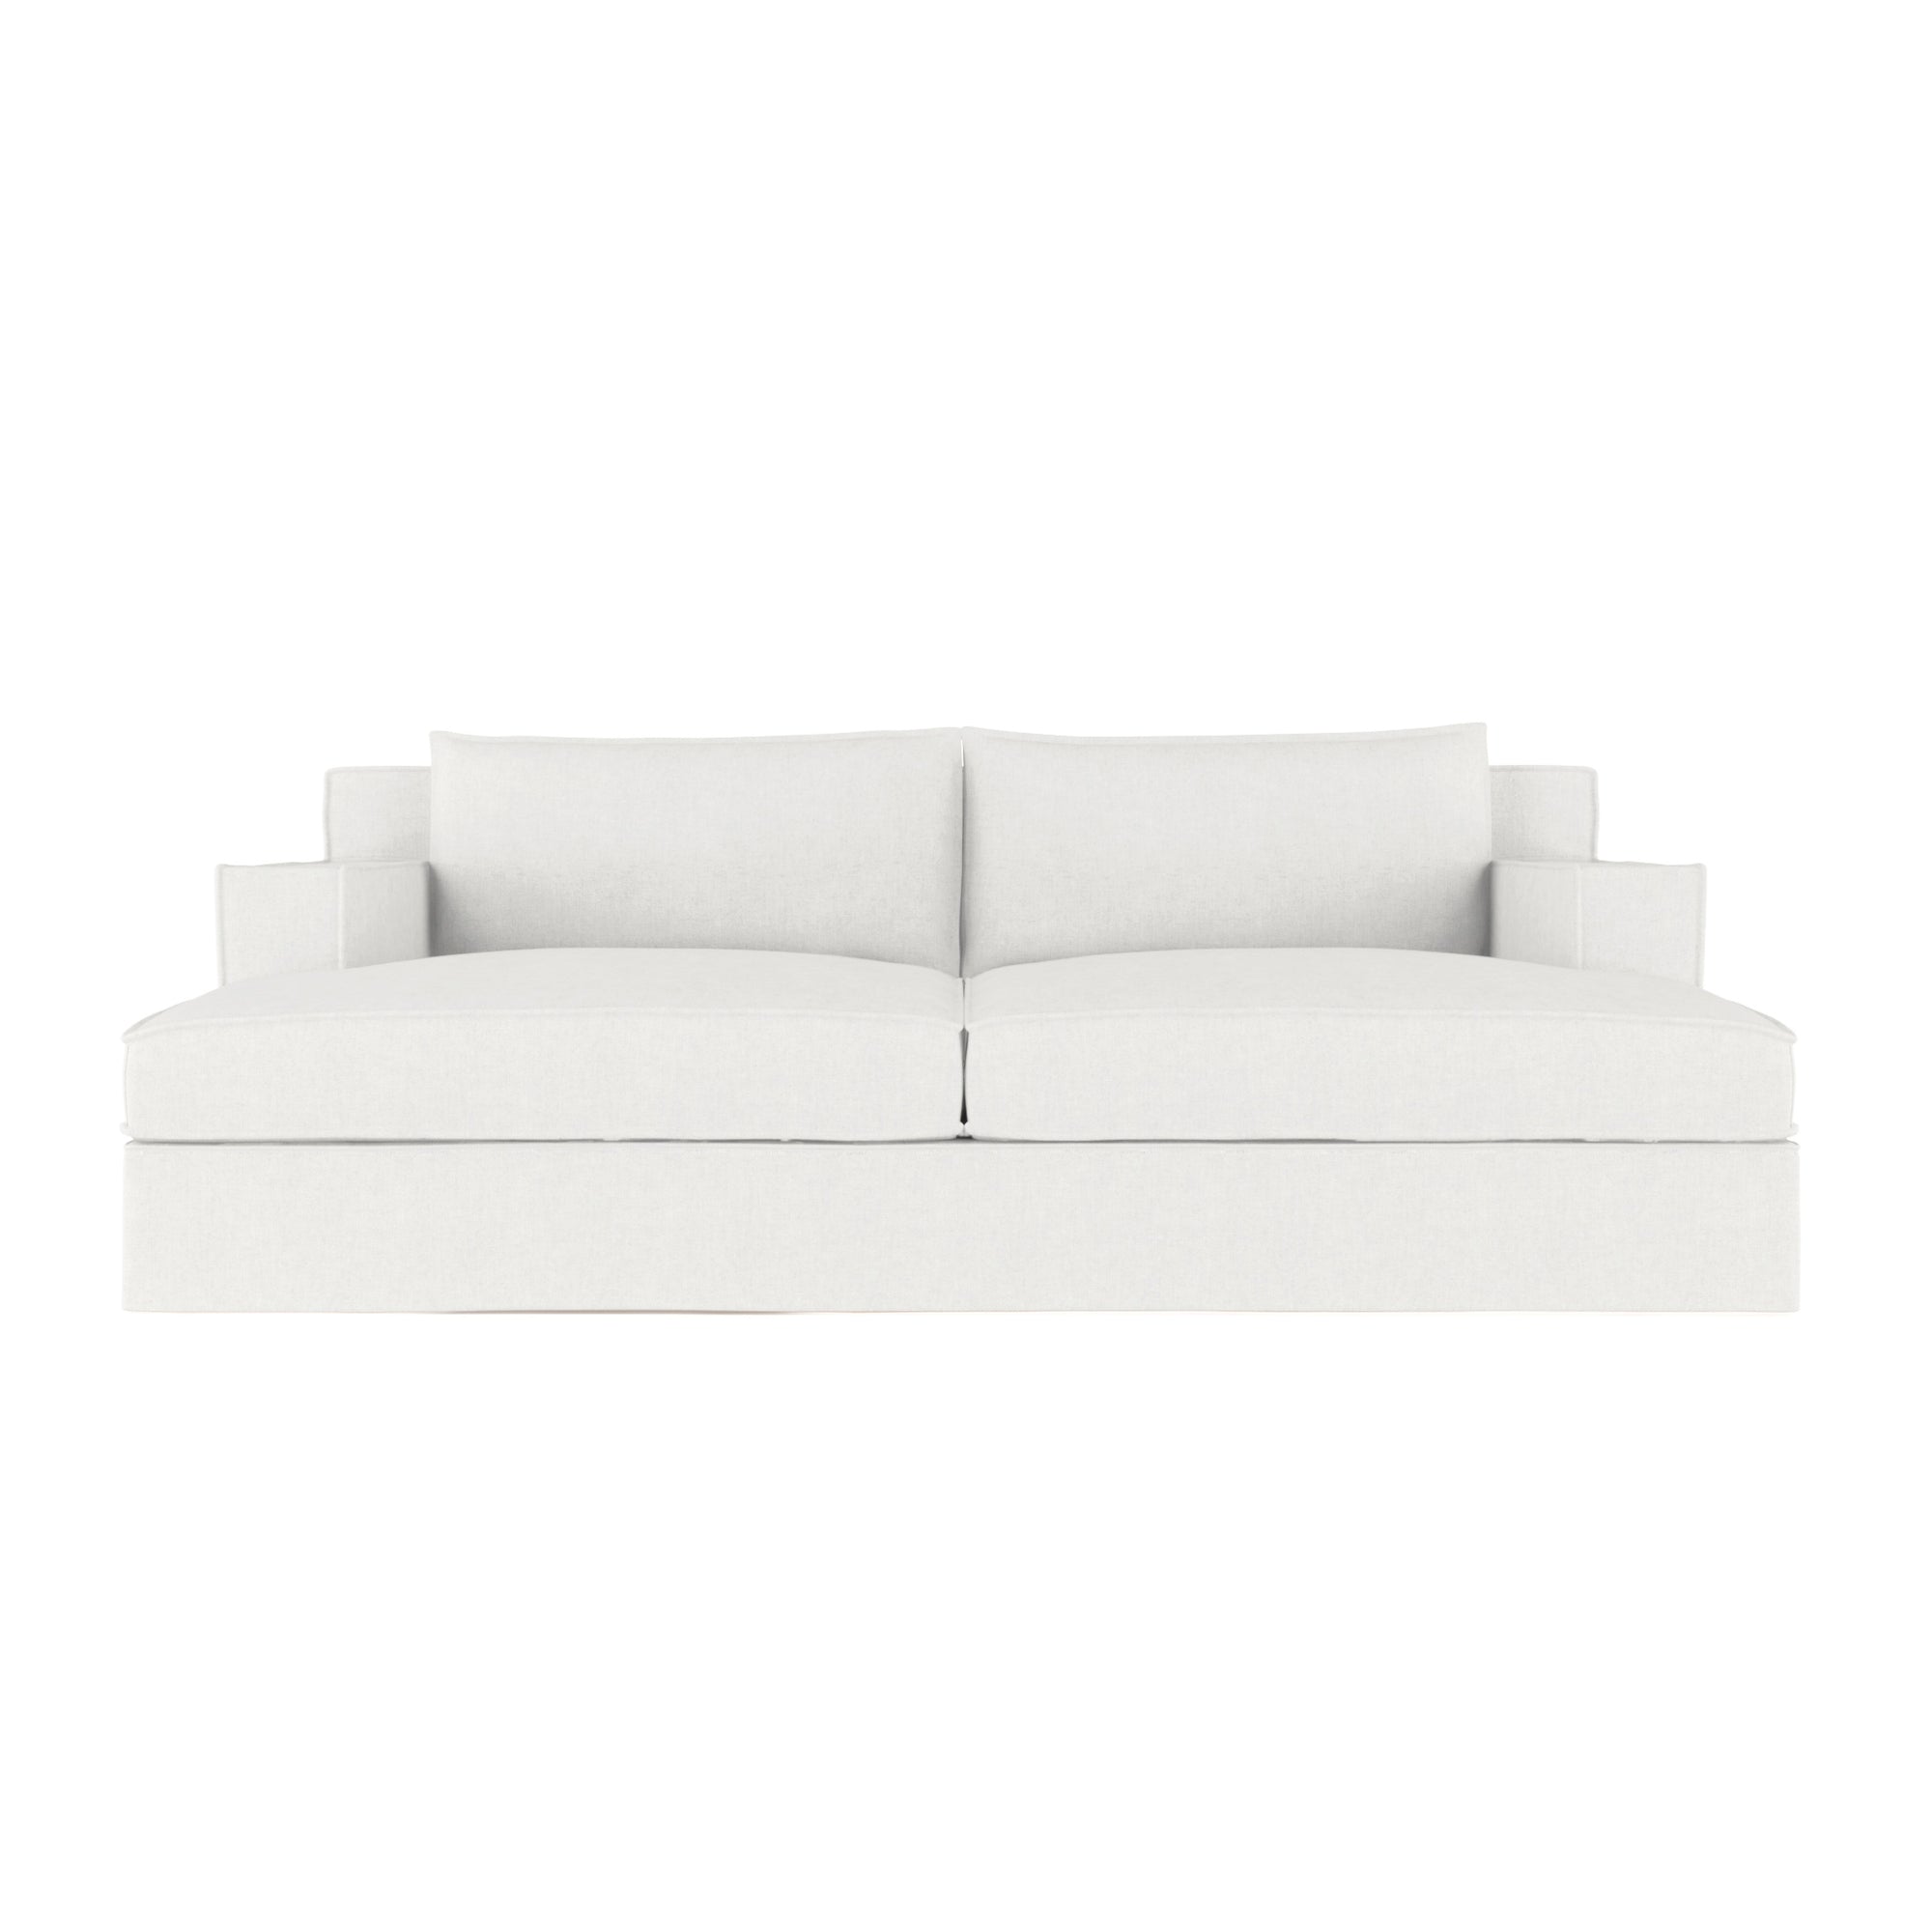 Mulberry Daybed - Blanc Box Weave Linen